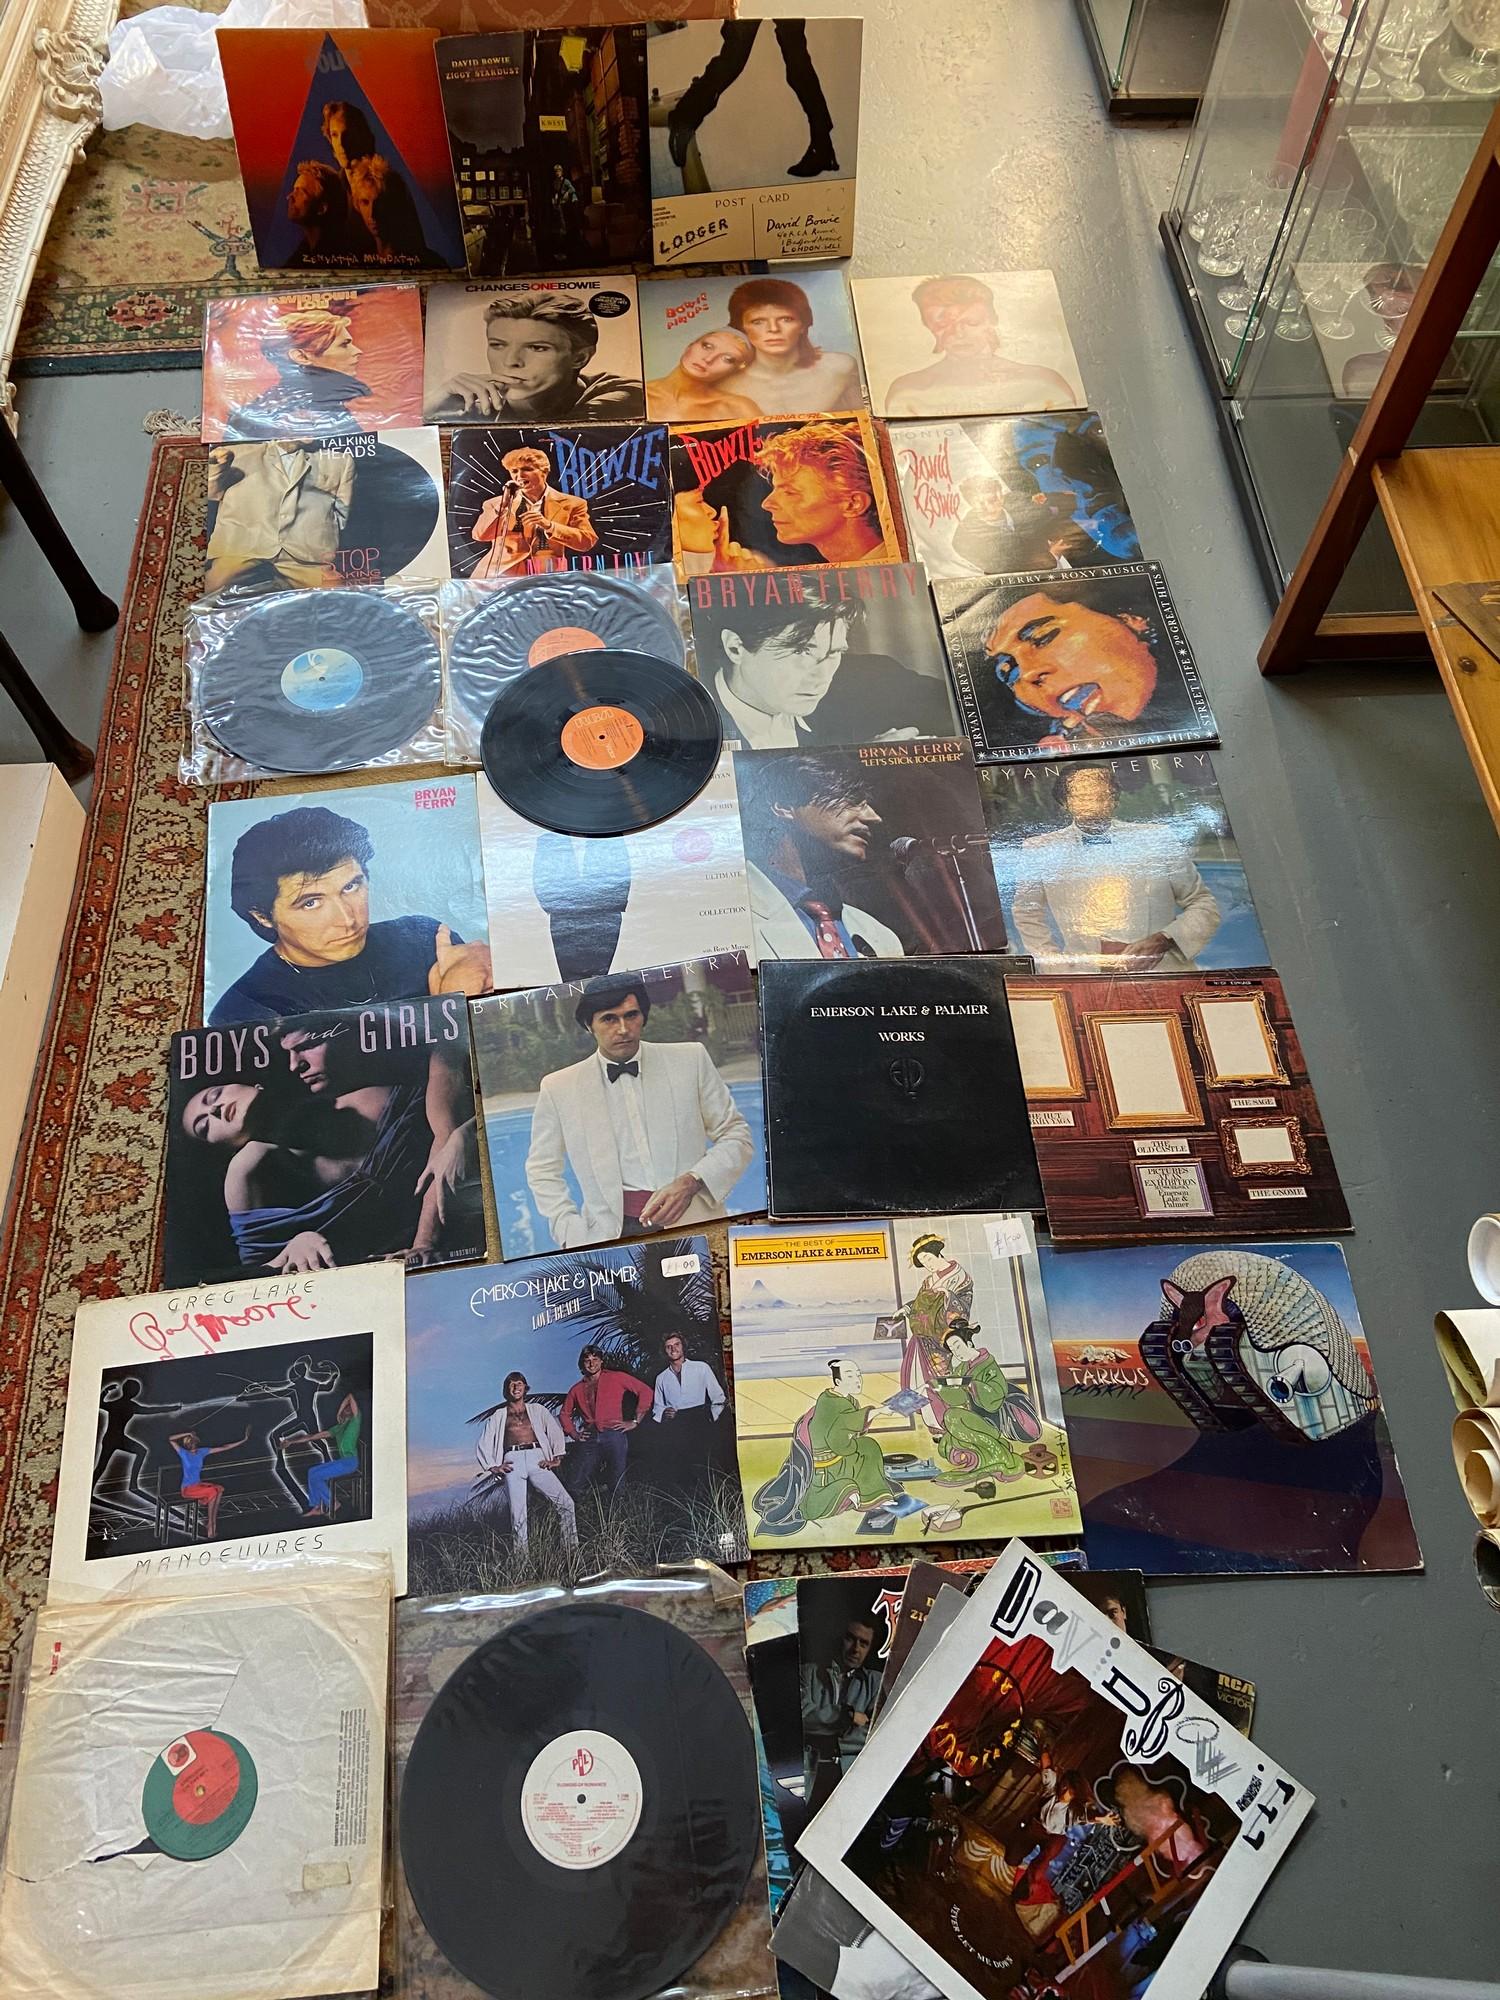 A Large collection of LP Records to include David Bowie, THE POLICE, TALKING HEADS, BRYAN FERRY, THE